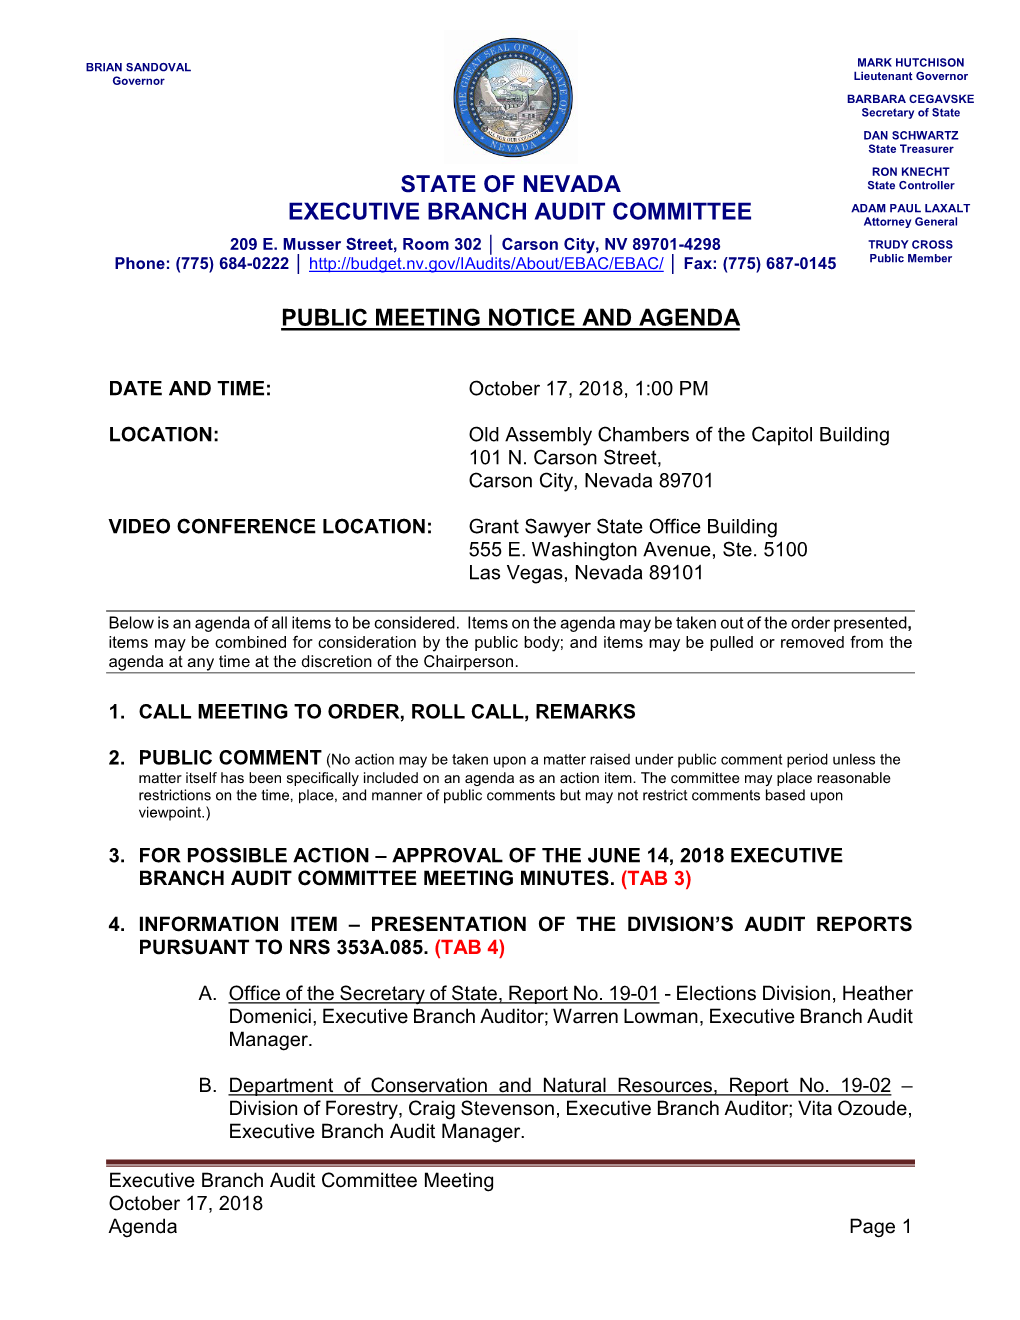 State of Nevada Executive Branch Audit Committee